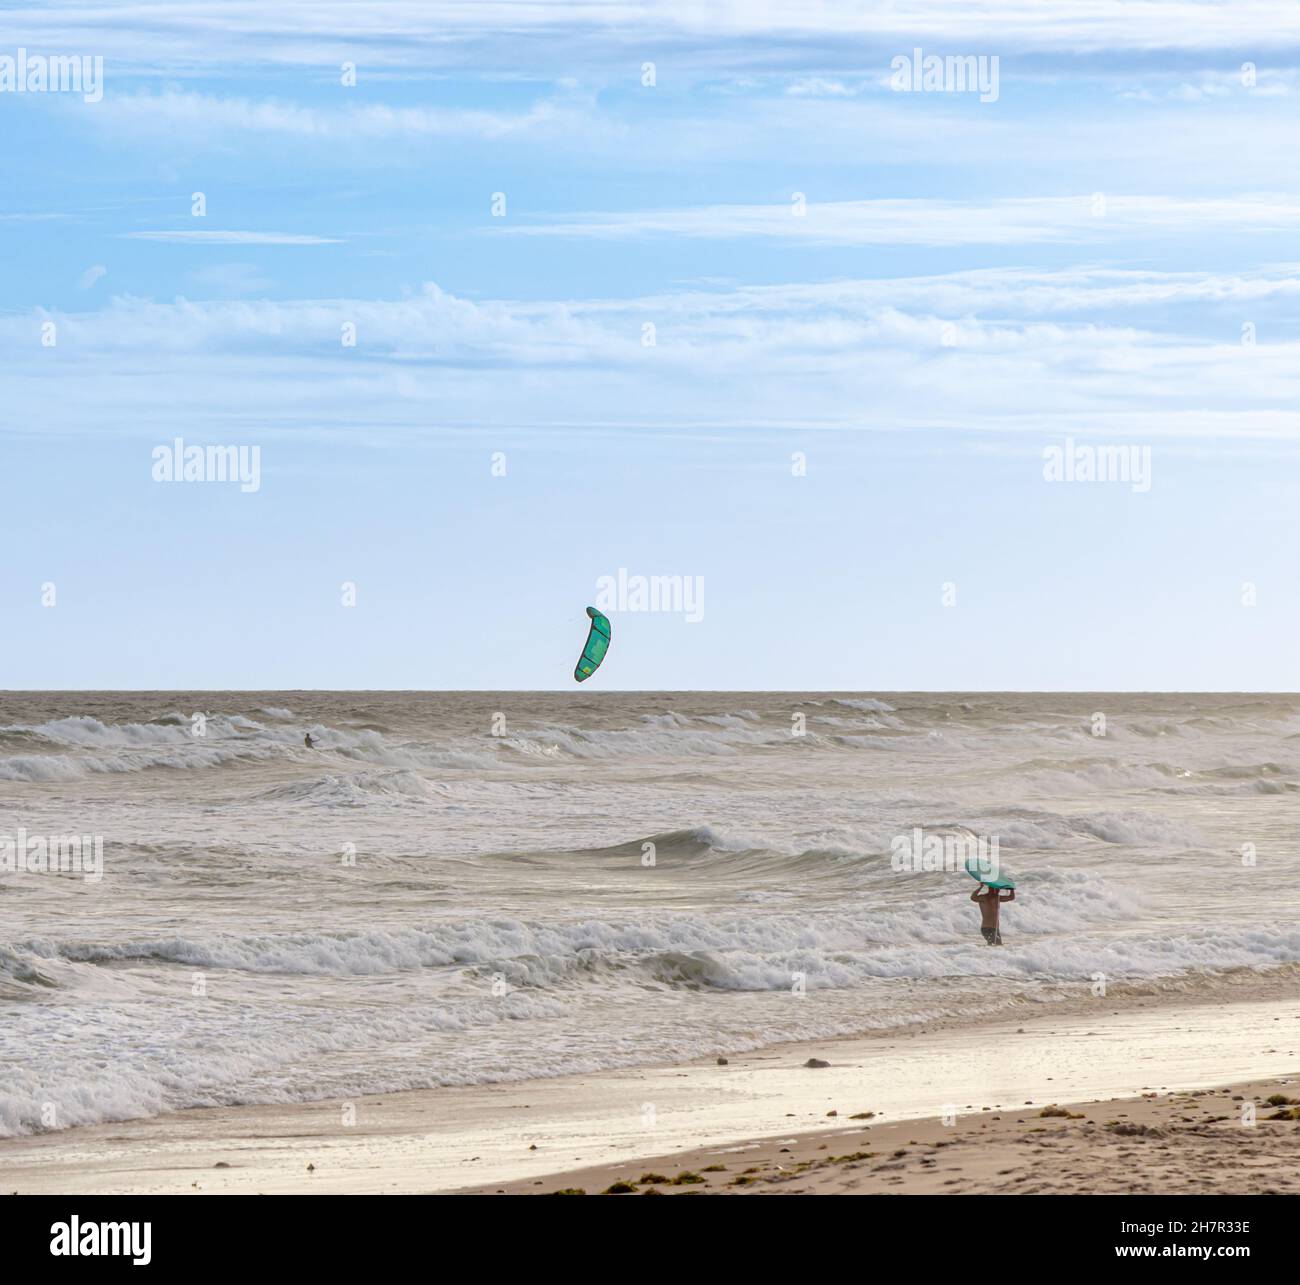 surfer and wind surf at Ditch Plains, Montauk, NY Stock Photo